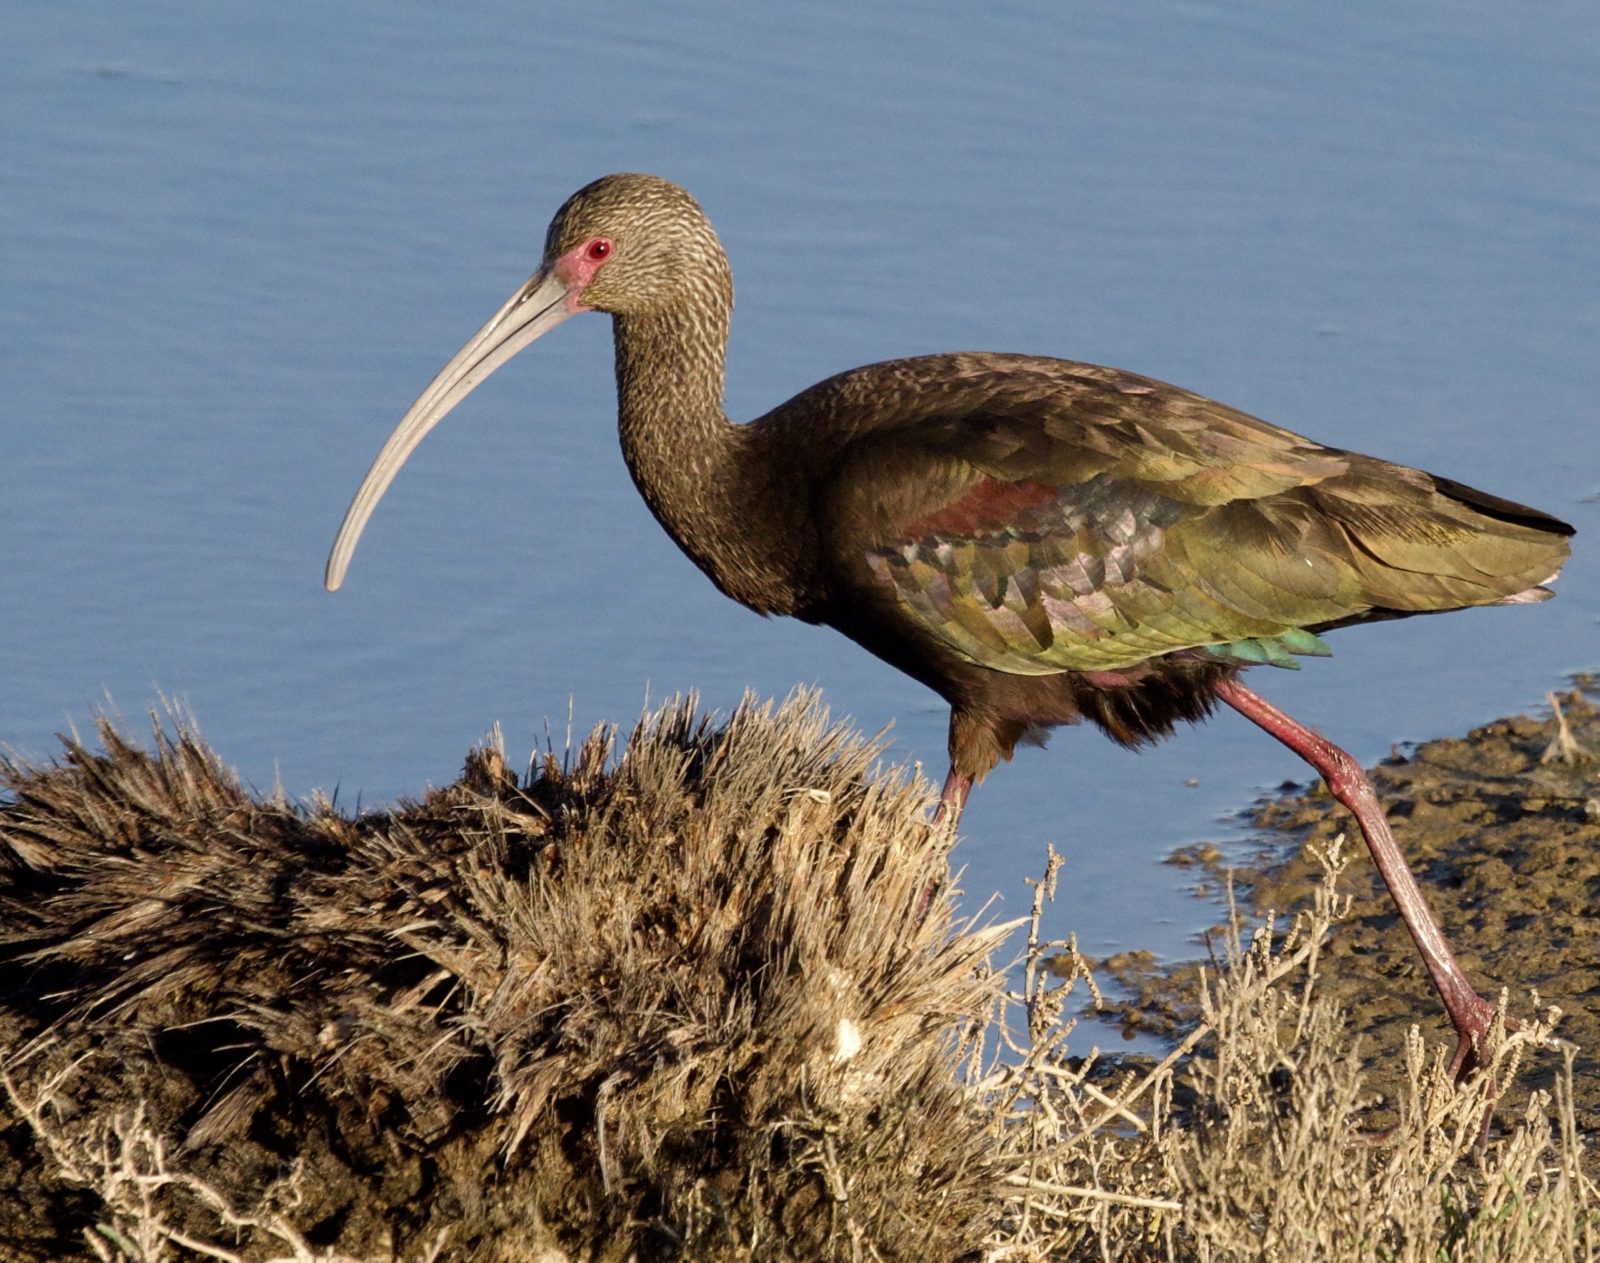 White-Faced Ibis at Bolsa Chica Ecological Reserve